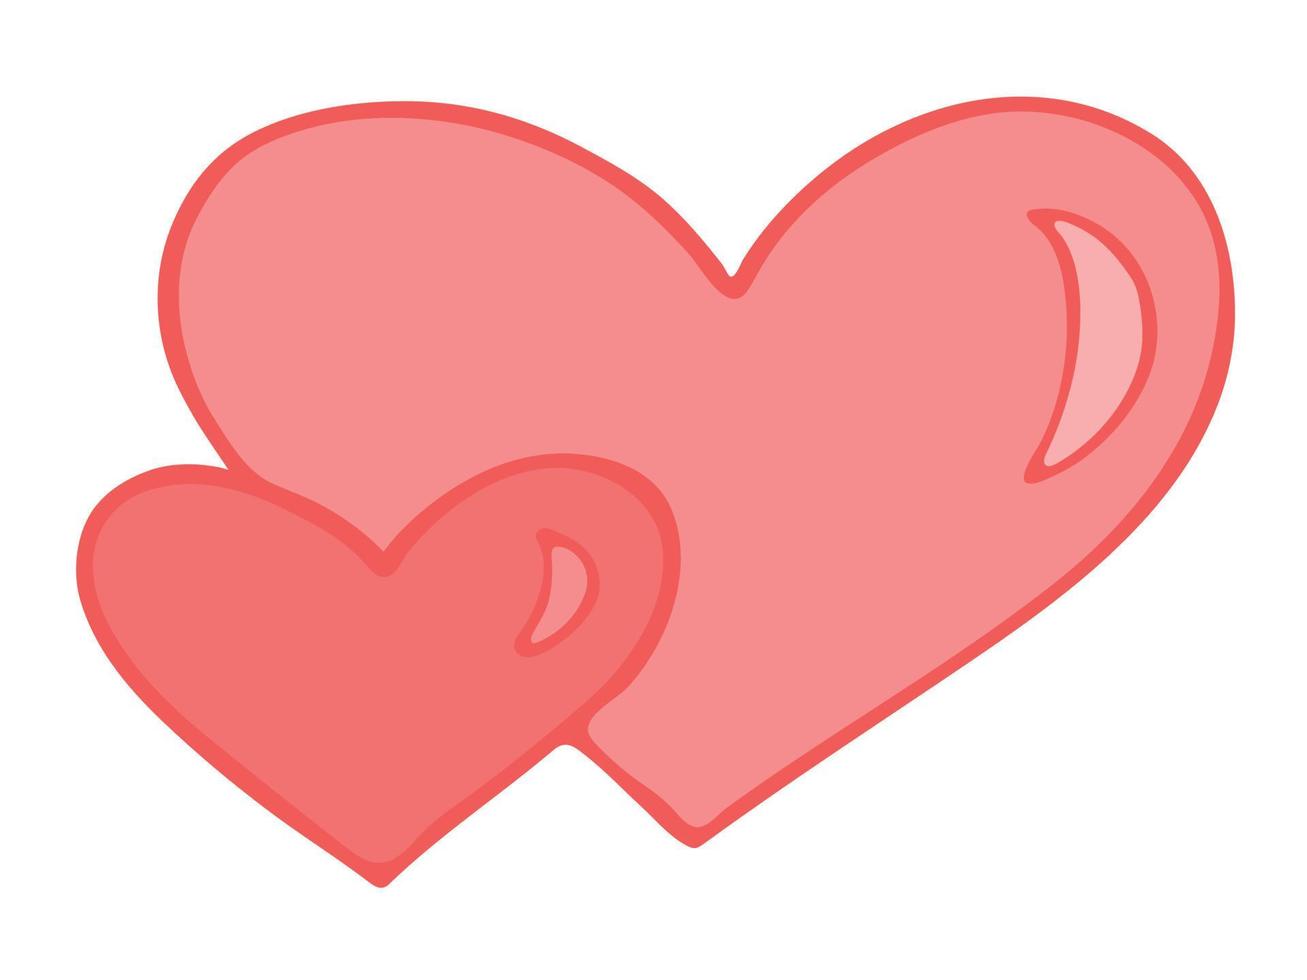 Simple hand drawn heart illustration isolated on a white background. Cute valentine's day heart doodle. vector